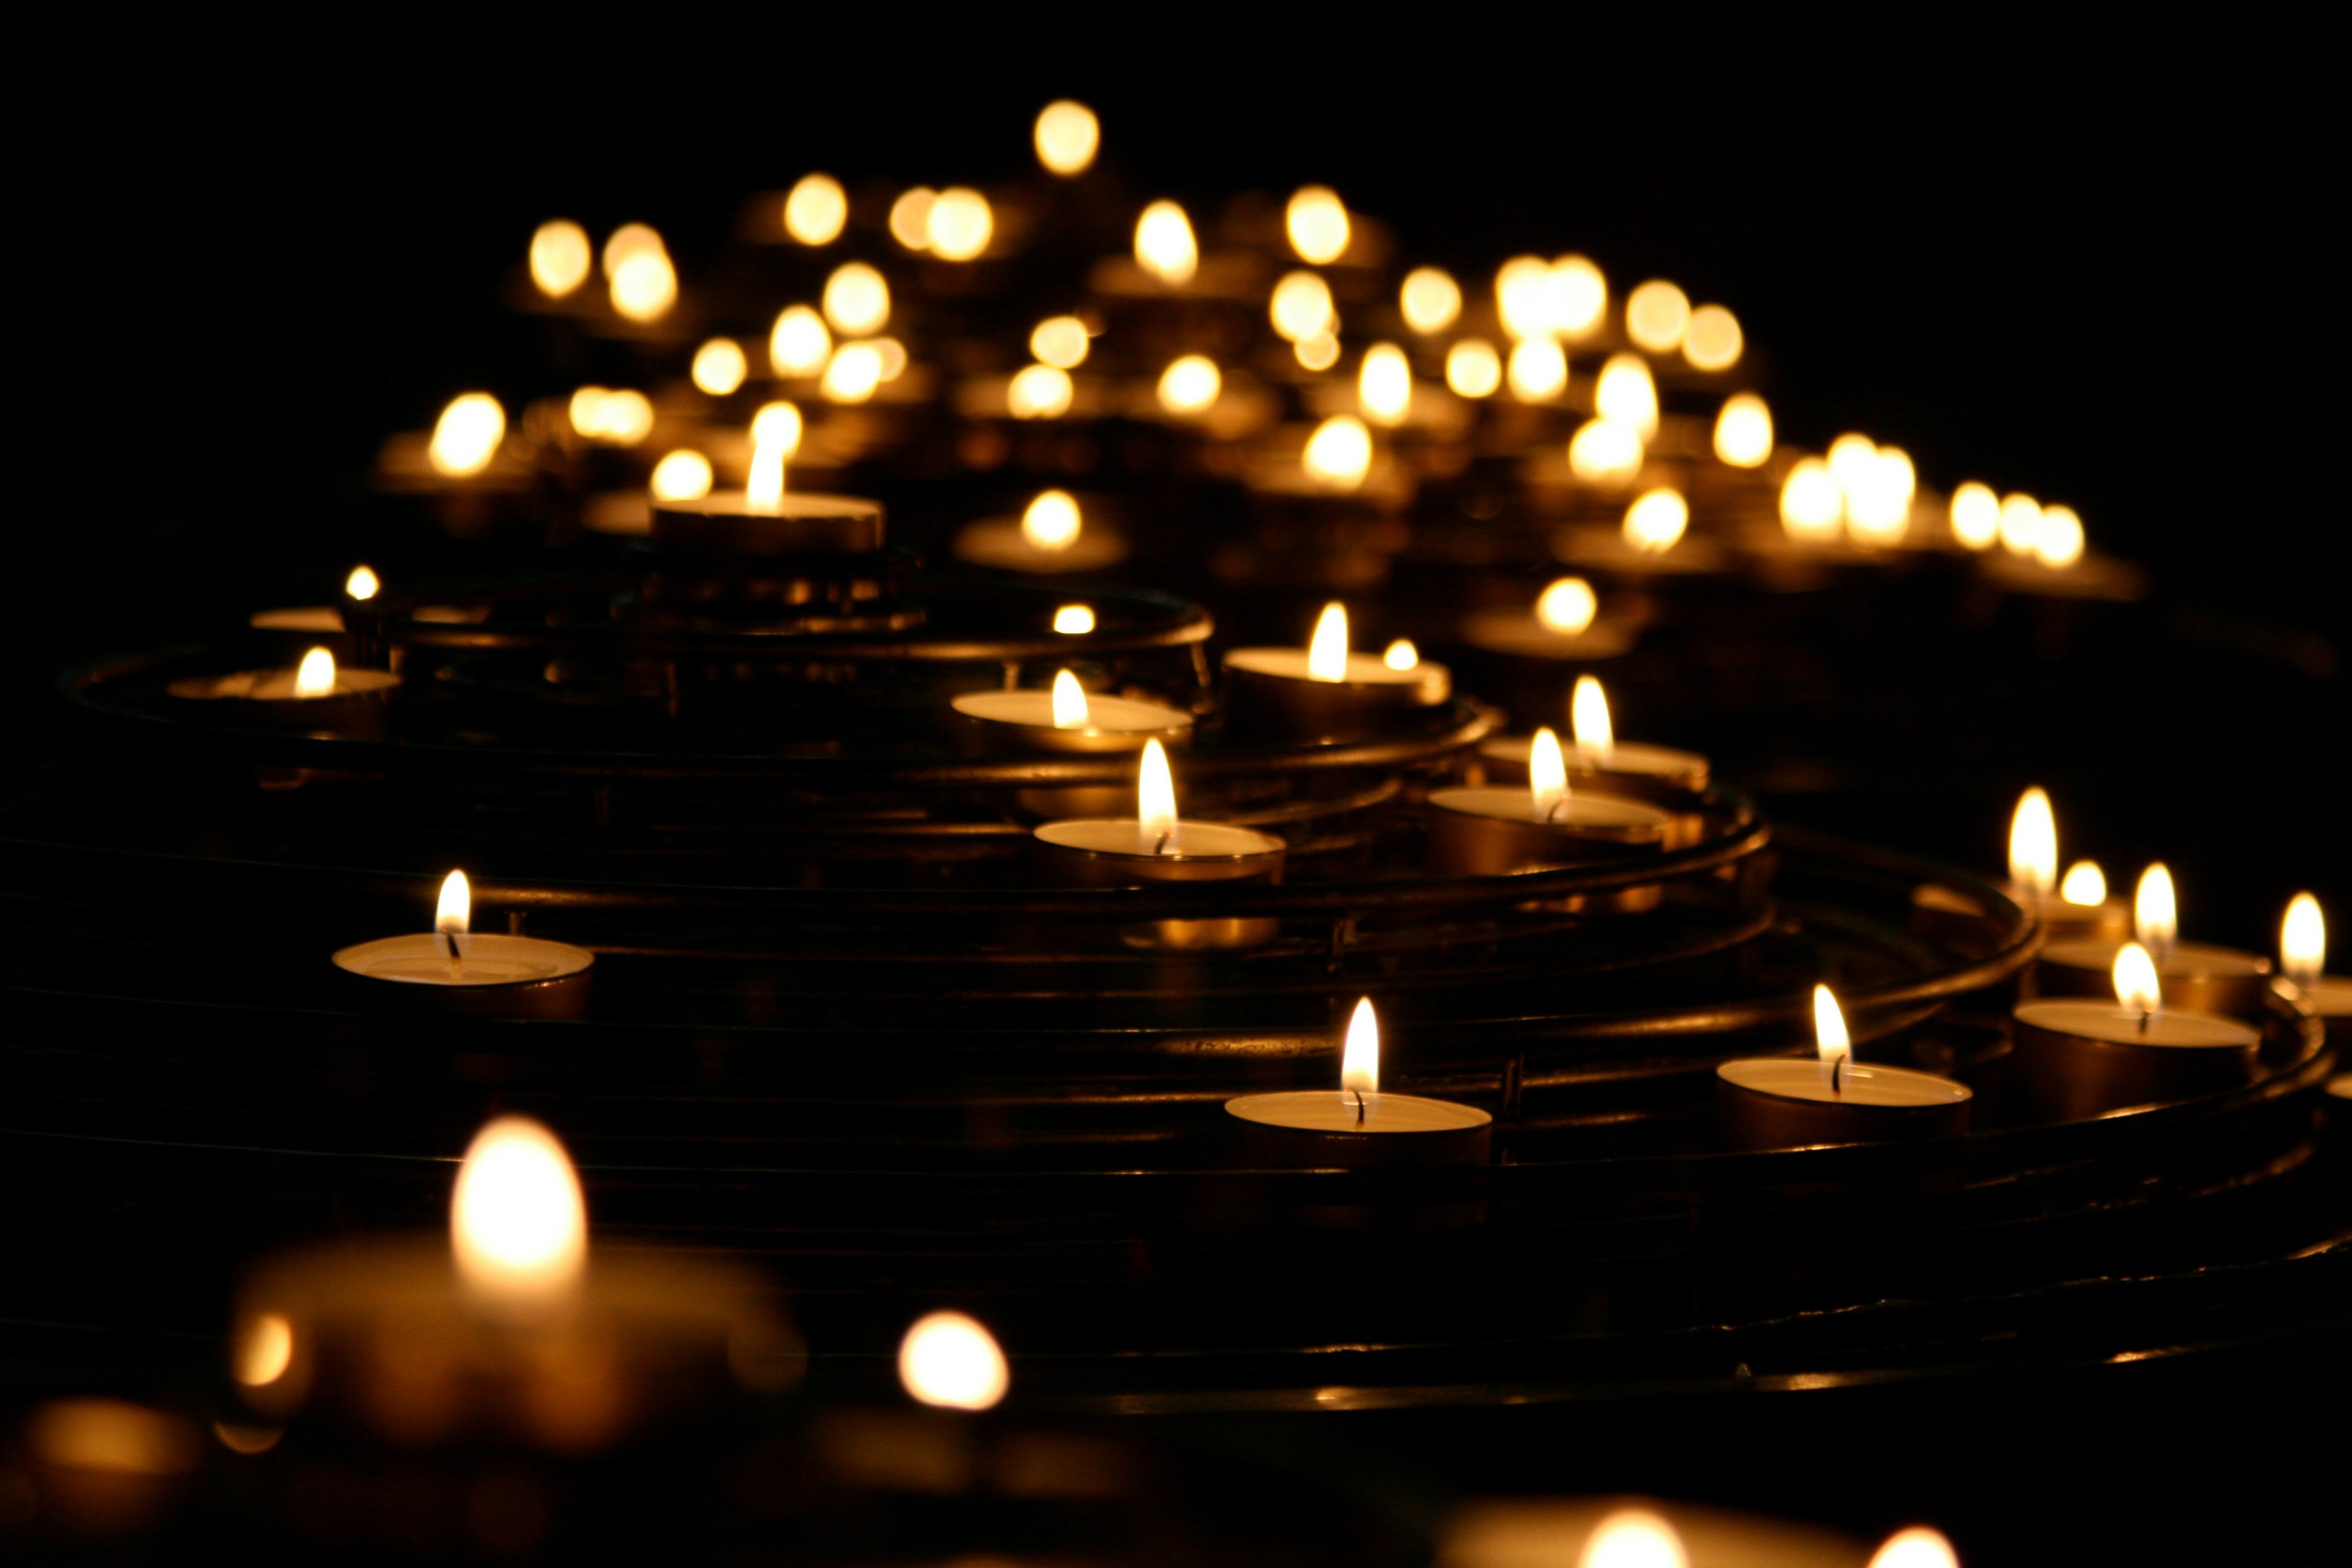  Photo of candles in the dark.Photo by Mike Labrum on Unsplash